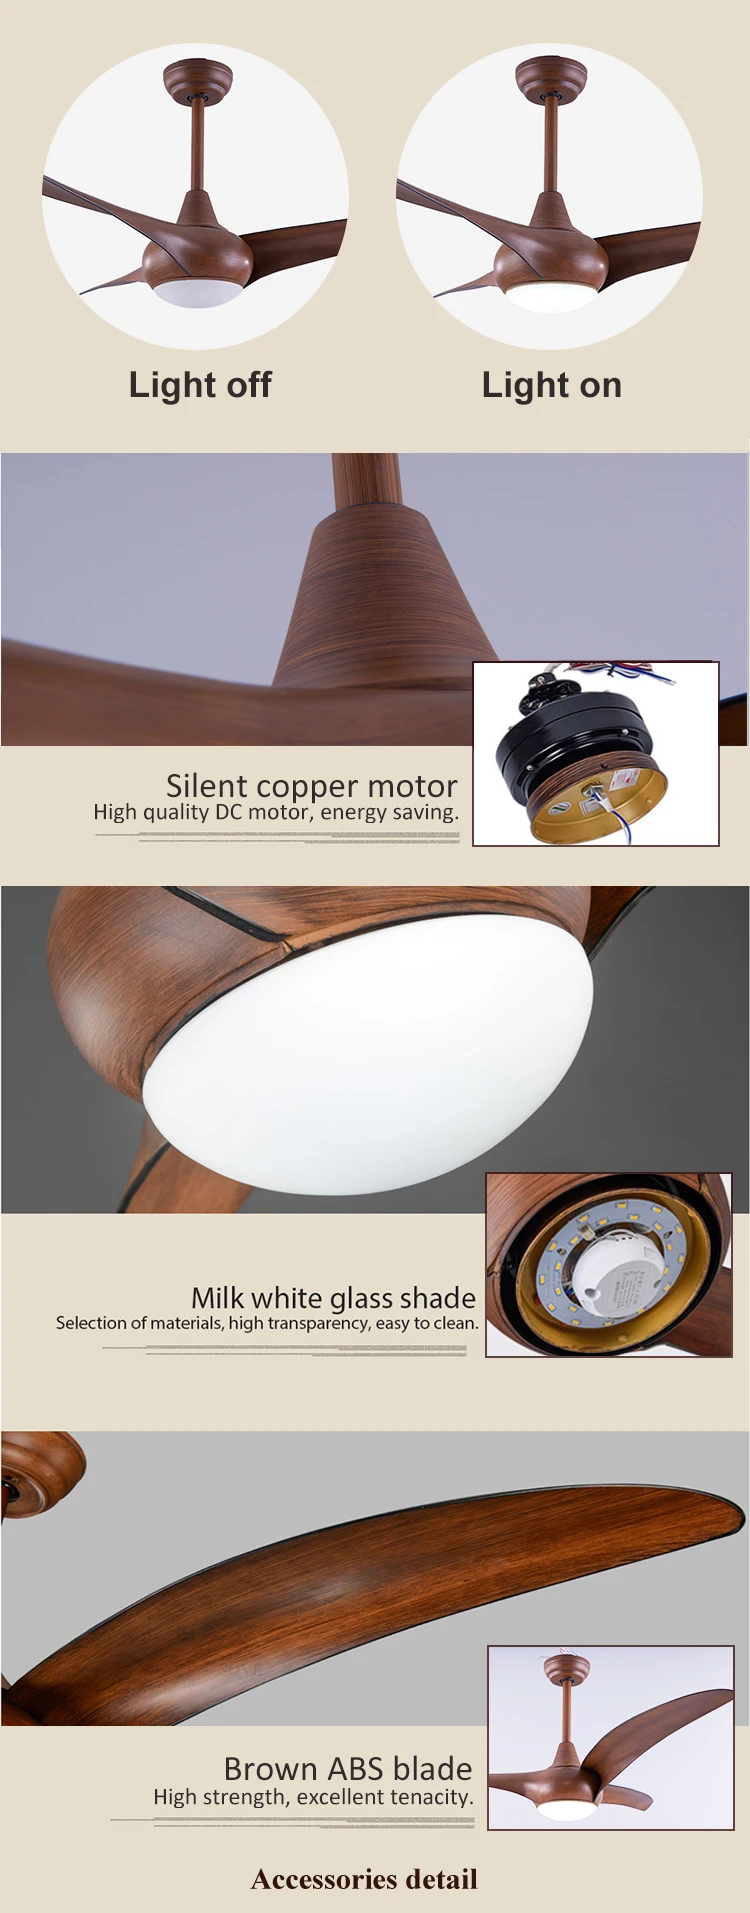 Superior High Speed Electric Door Motor Wood Color Ceiling Fans With Light Led